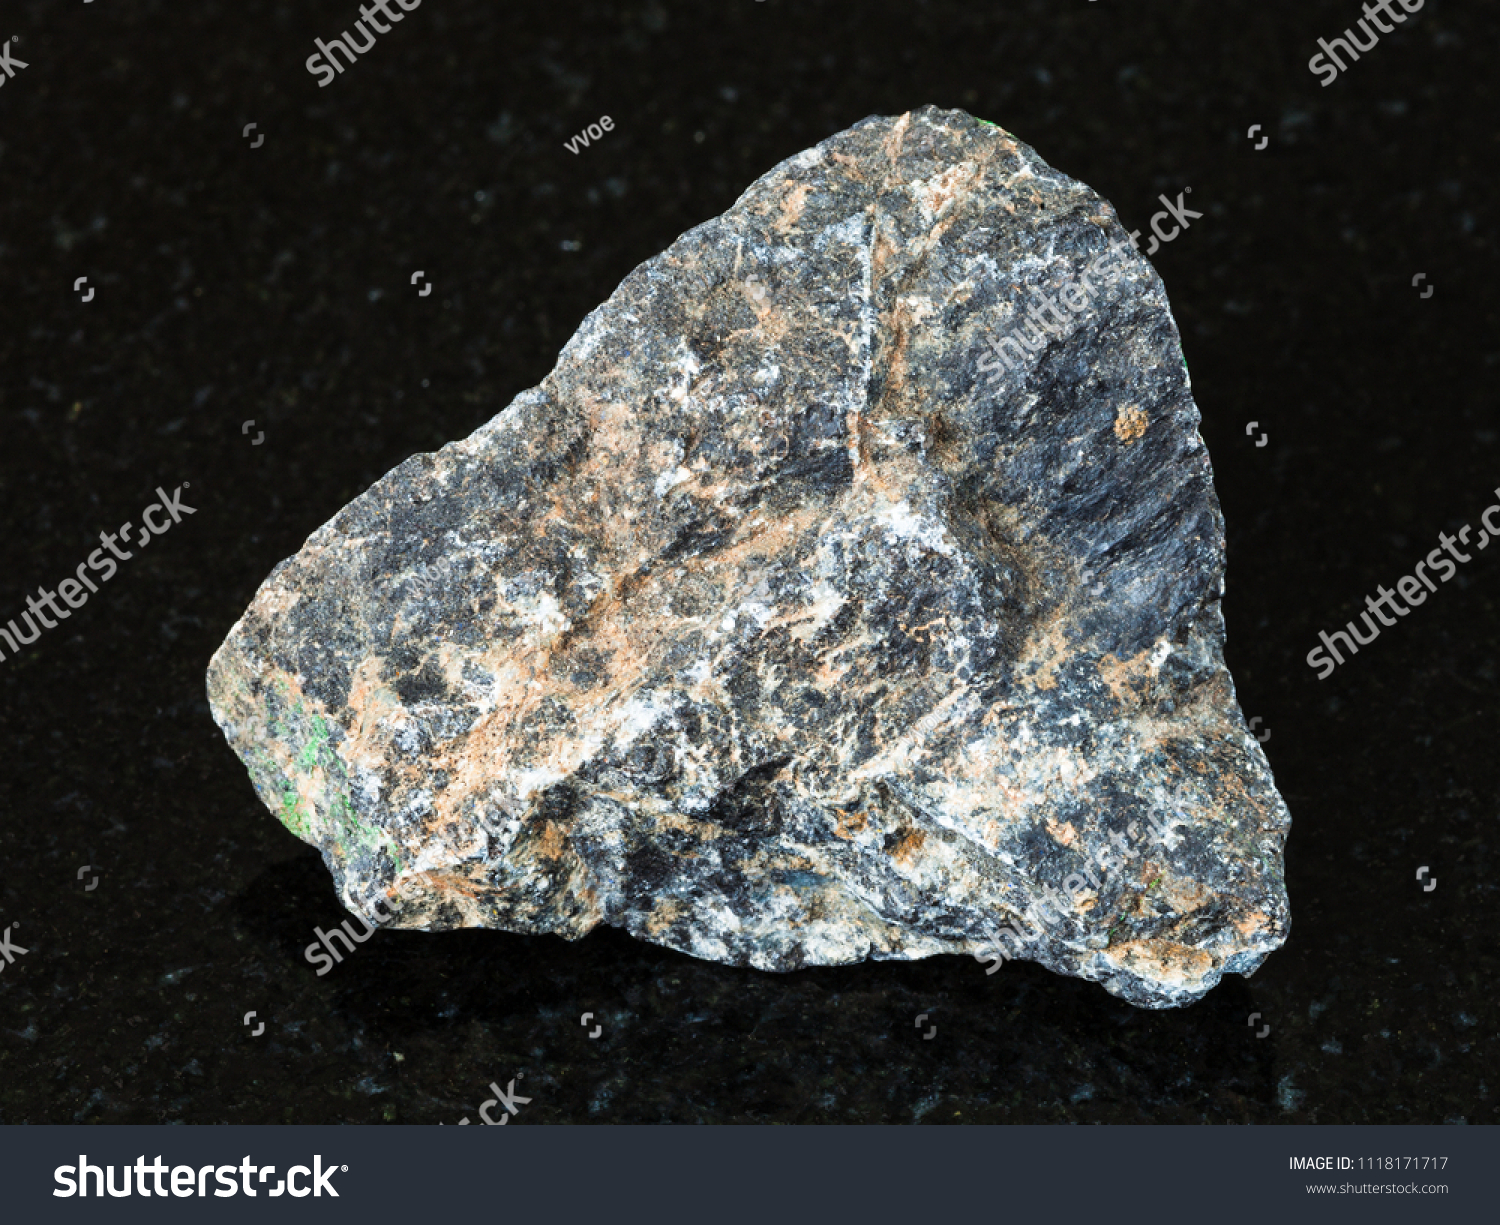 macro shooting of natural mineral - rough Chromite stone on black granite from Ural Mountains #1118171717